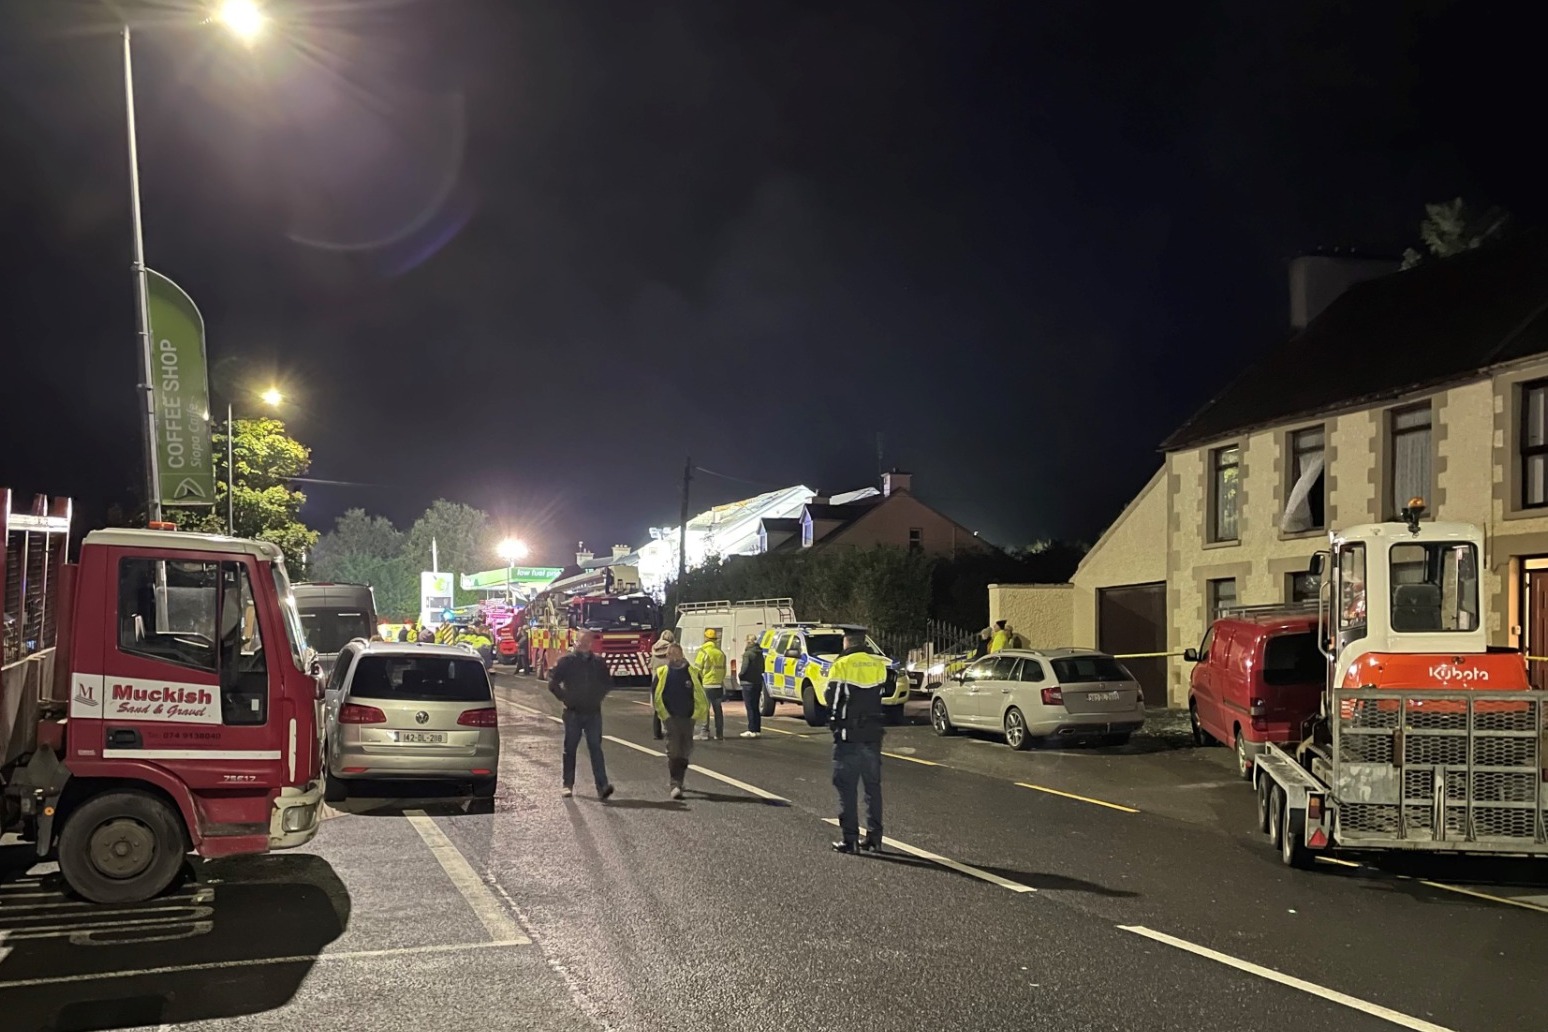 Search efforts continue at petrol station blast site as three deaths confirmed 